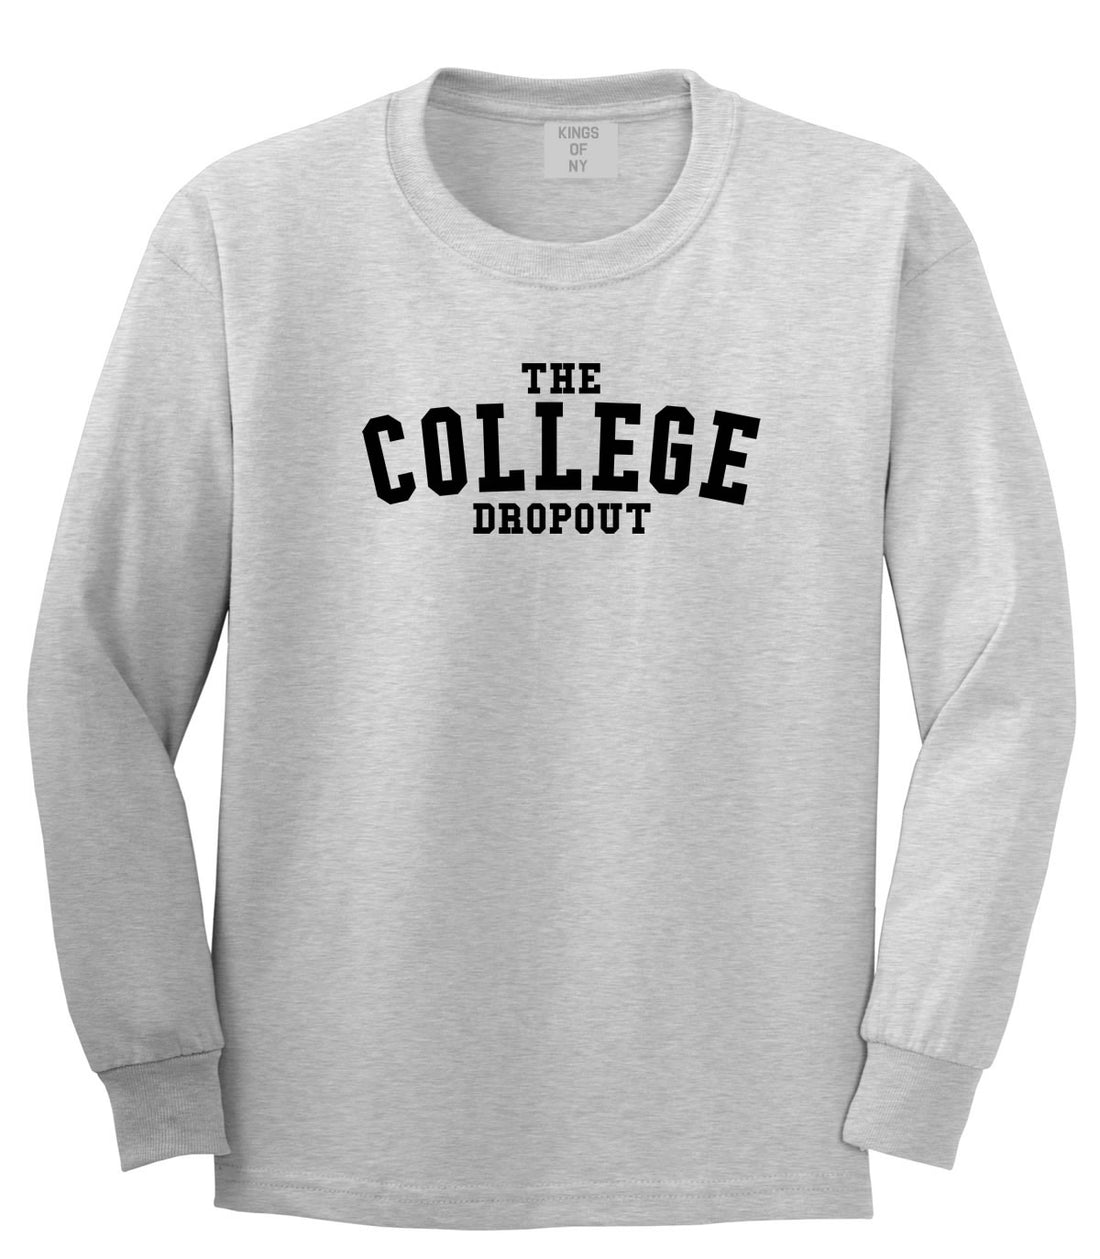 The College Dropout Album High School Long Sleeve T-Shirt in Grey By Kings Of NY